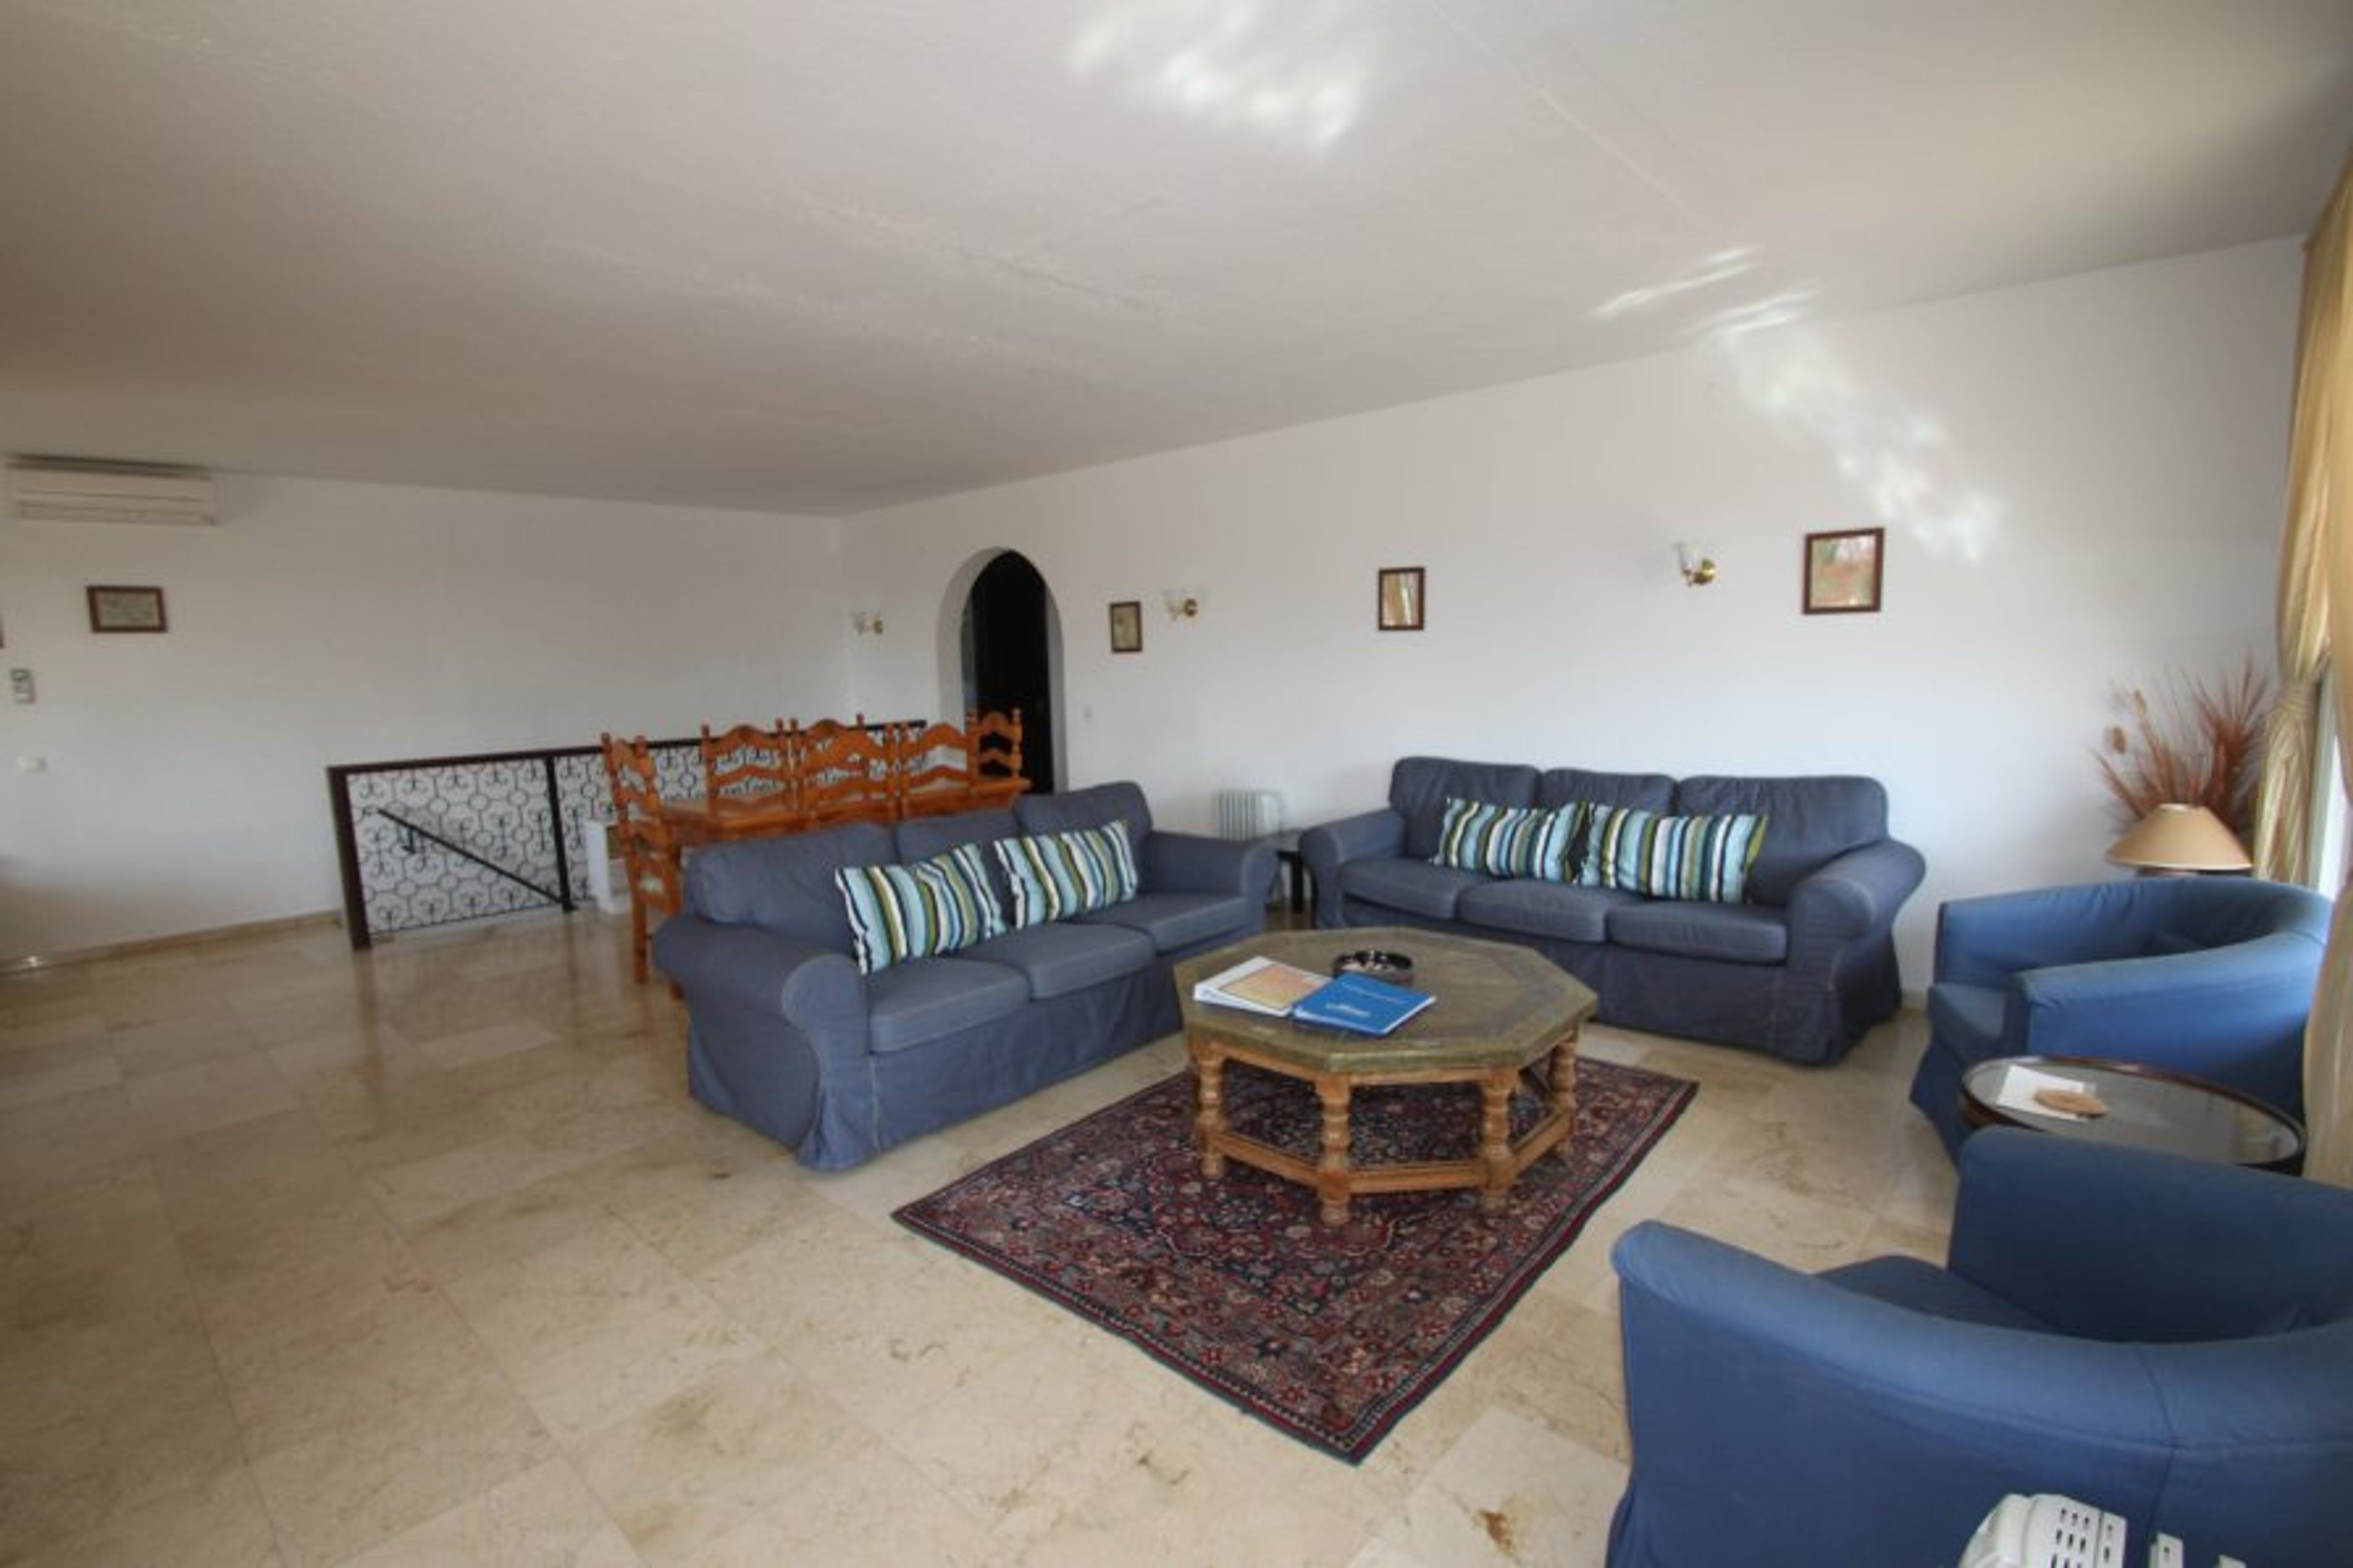 Spacious lounge & dining area with access to terrace overlloking pool.